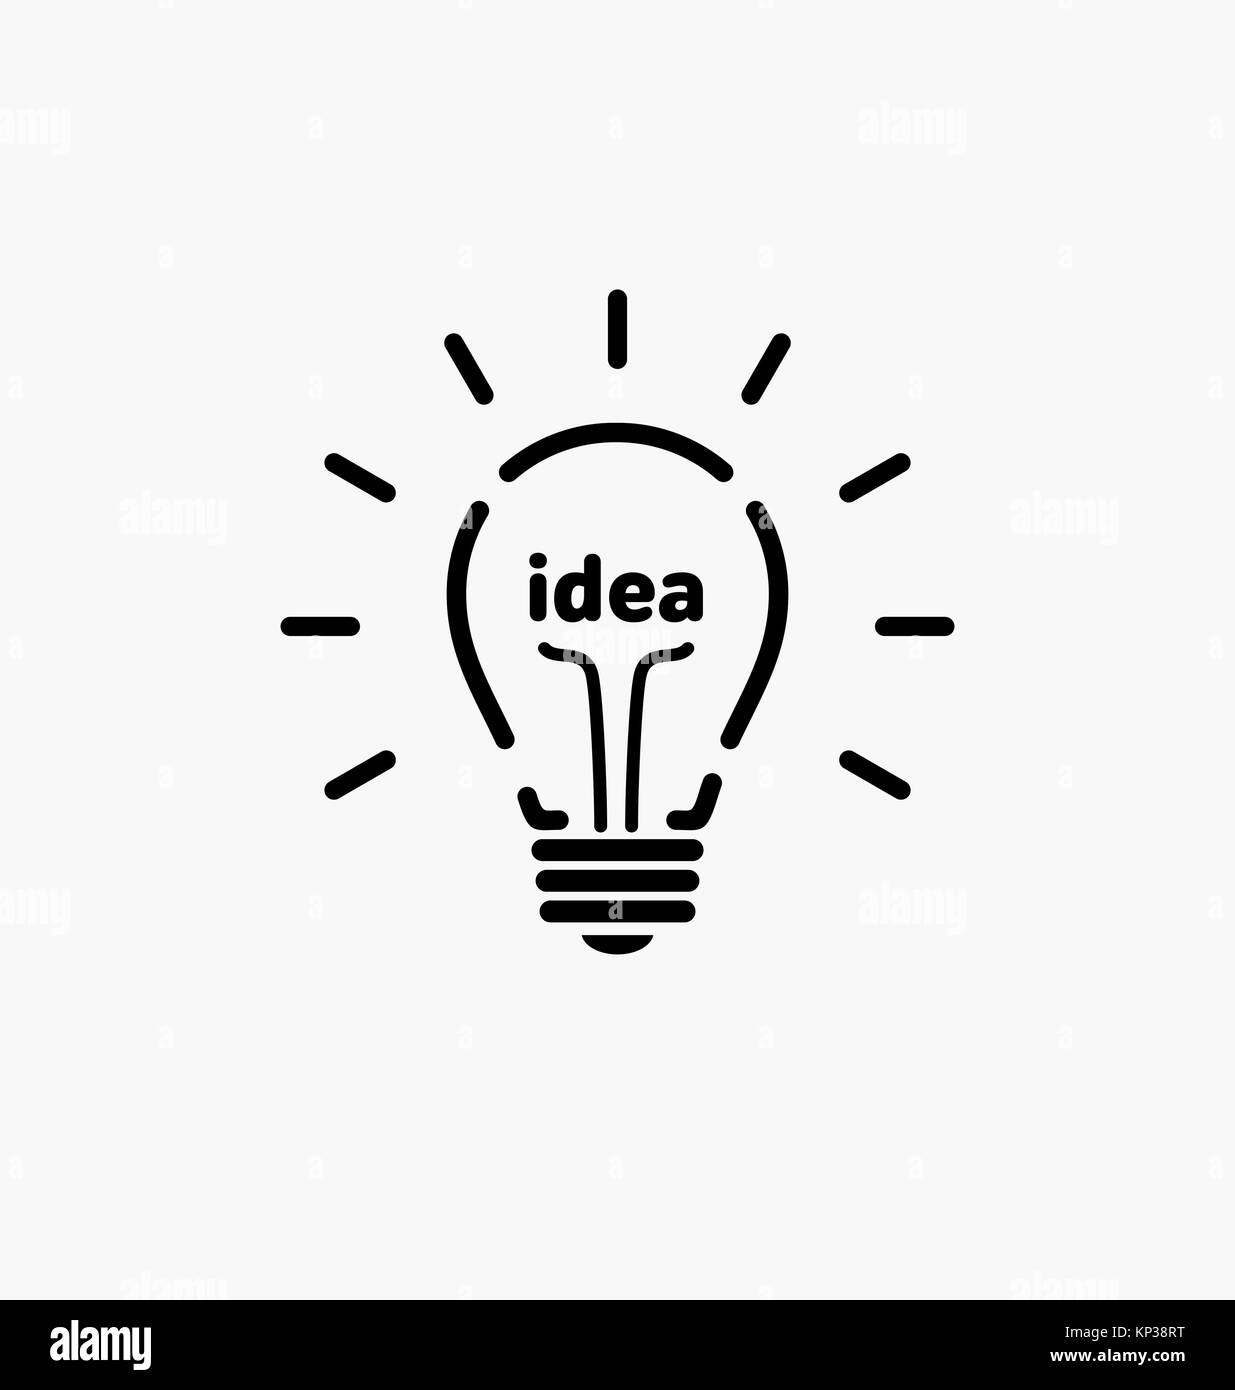 Vector light bulb icon with concept of idea. Brainstorming/Idea illustration. Stock Vector